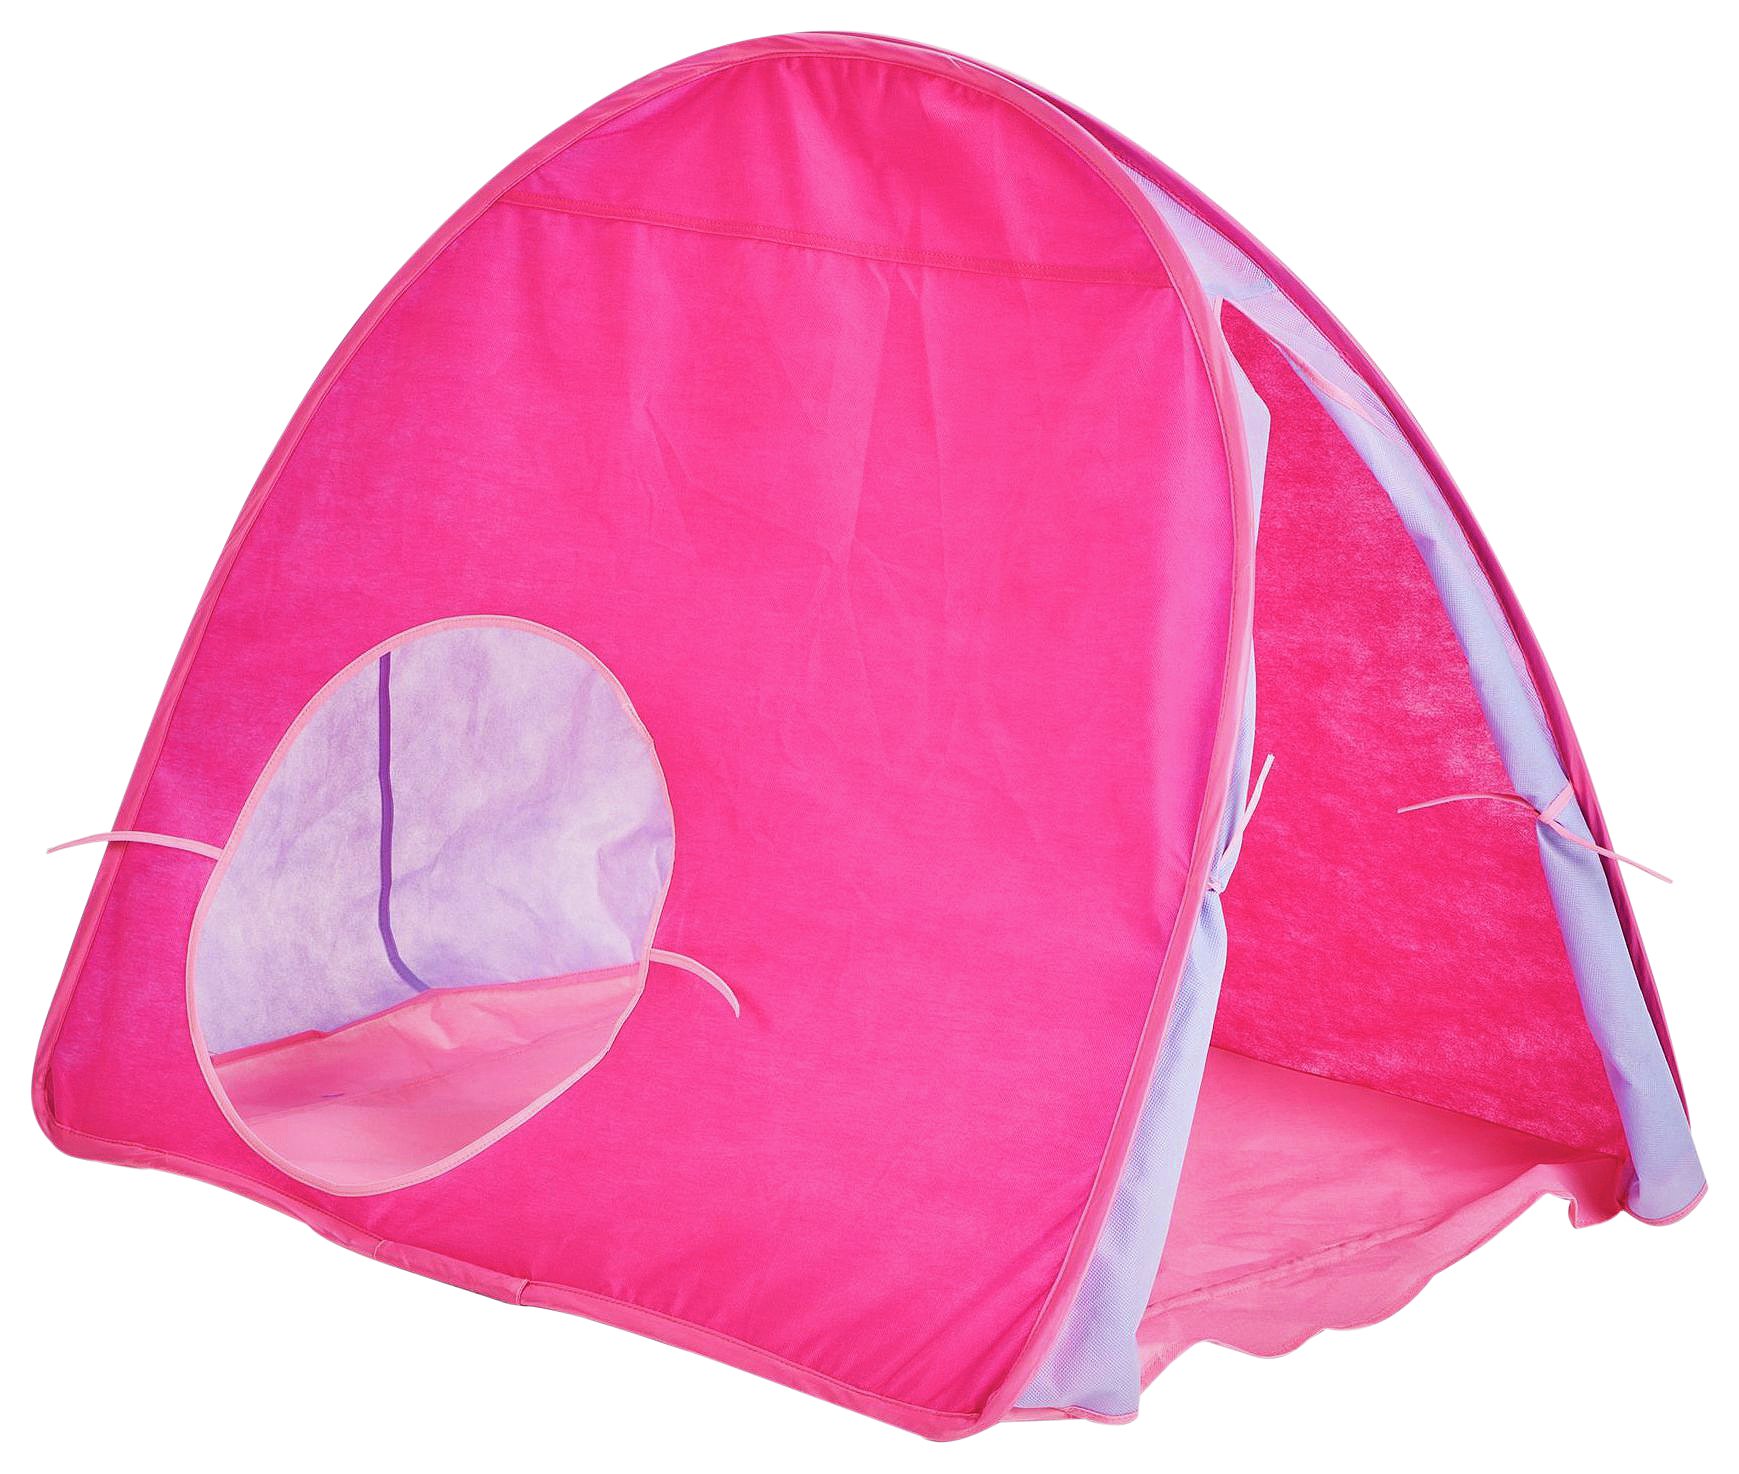 Chad Valley Pink Pop Up Play Tent Review